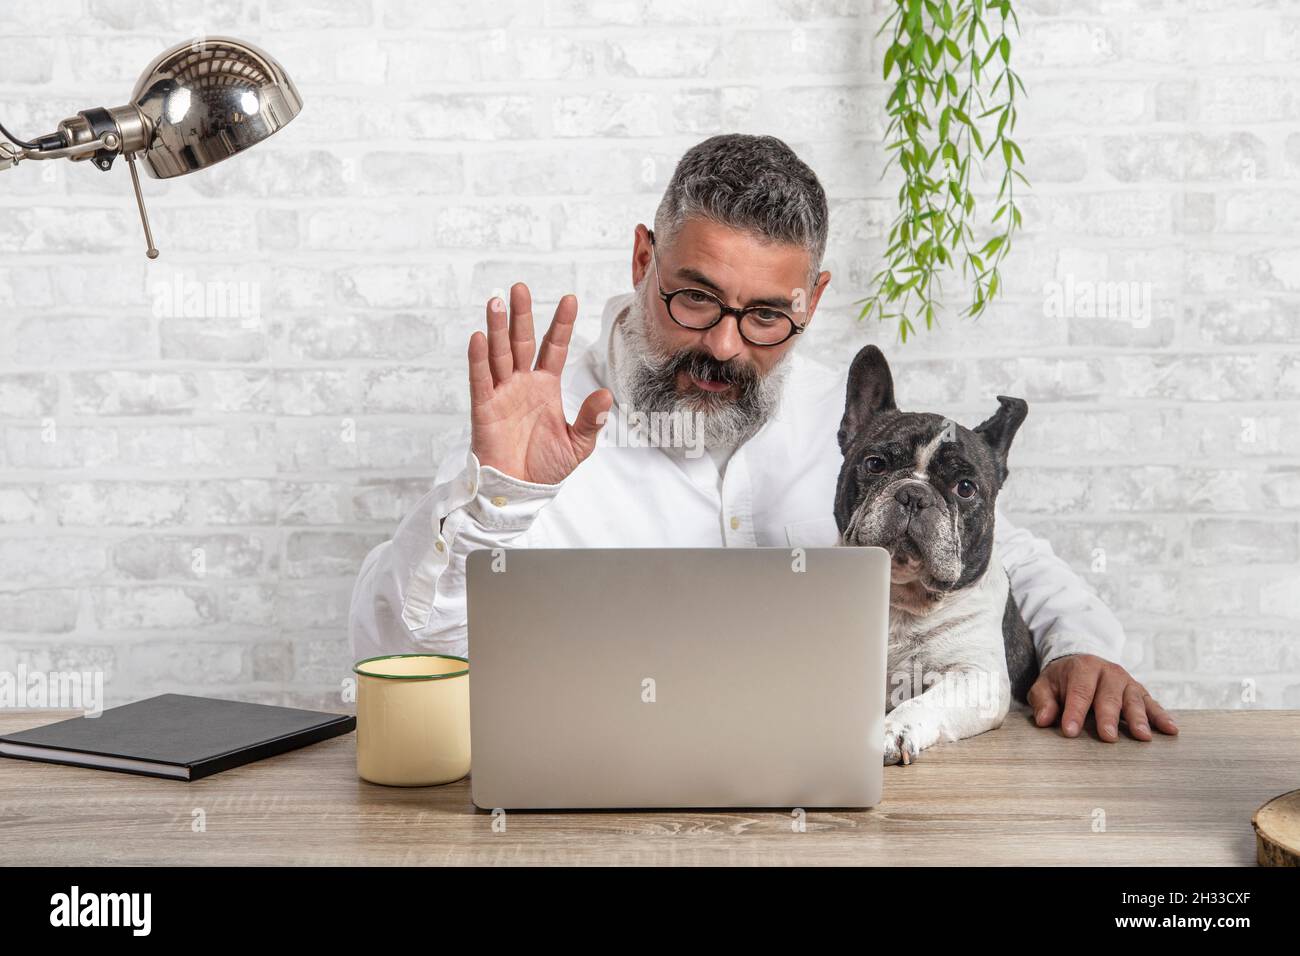 Freelance man working from home with his dog. Entering a meeting with a cute dog Stock Photo